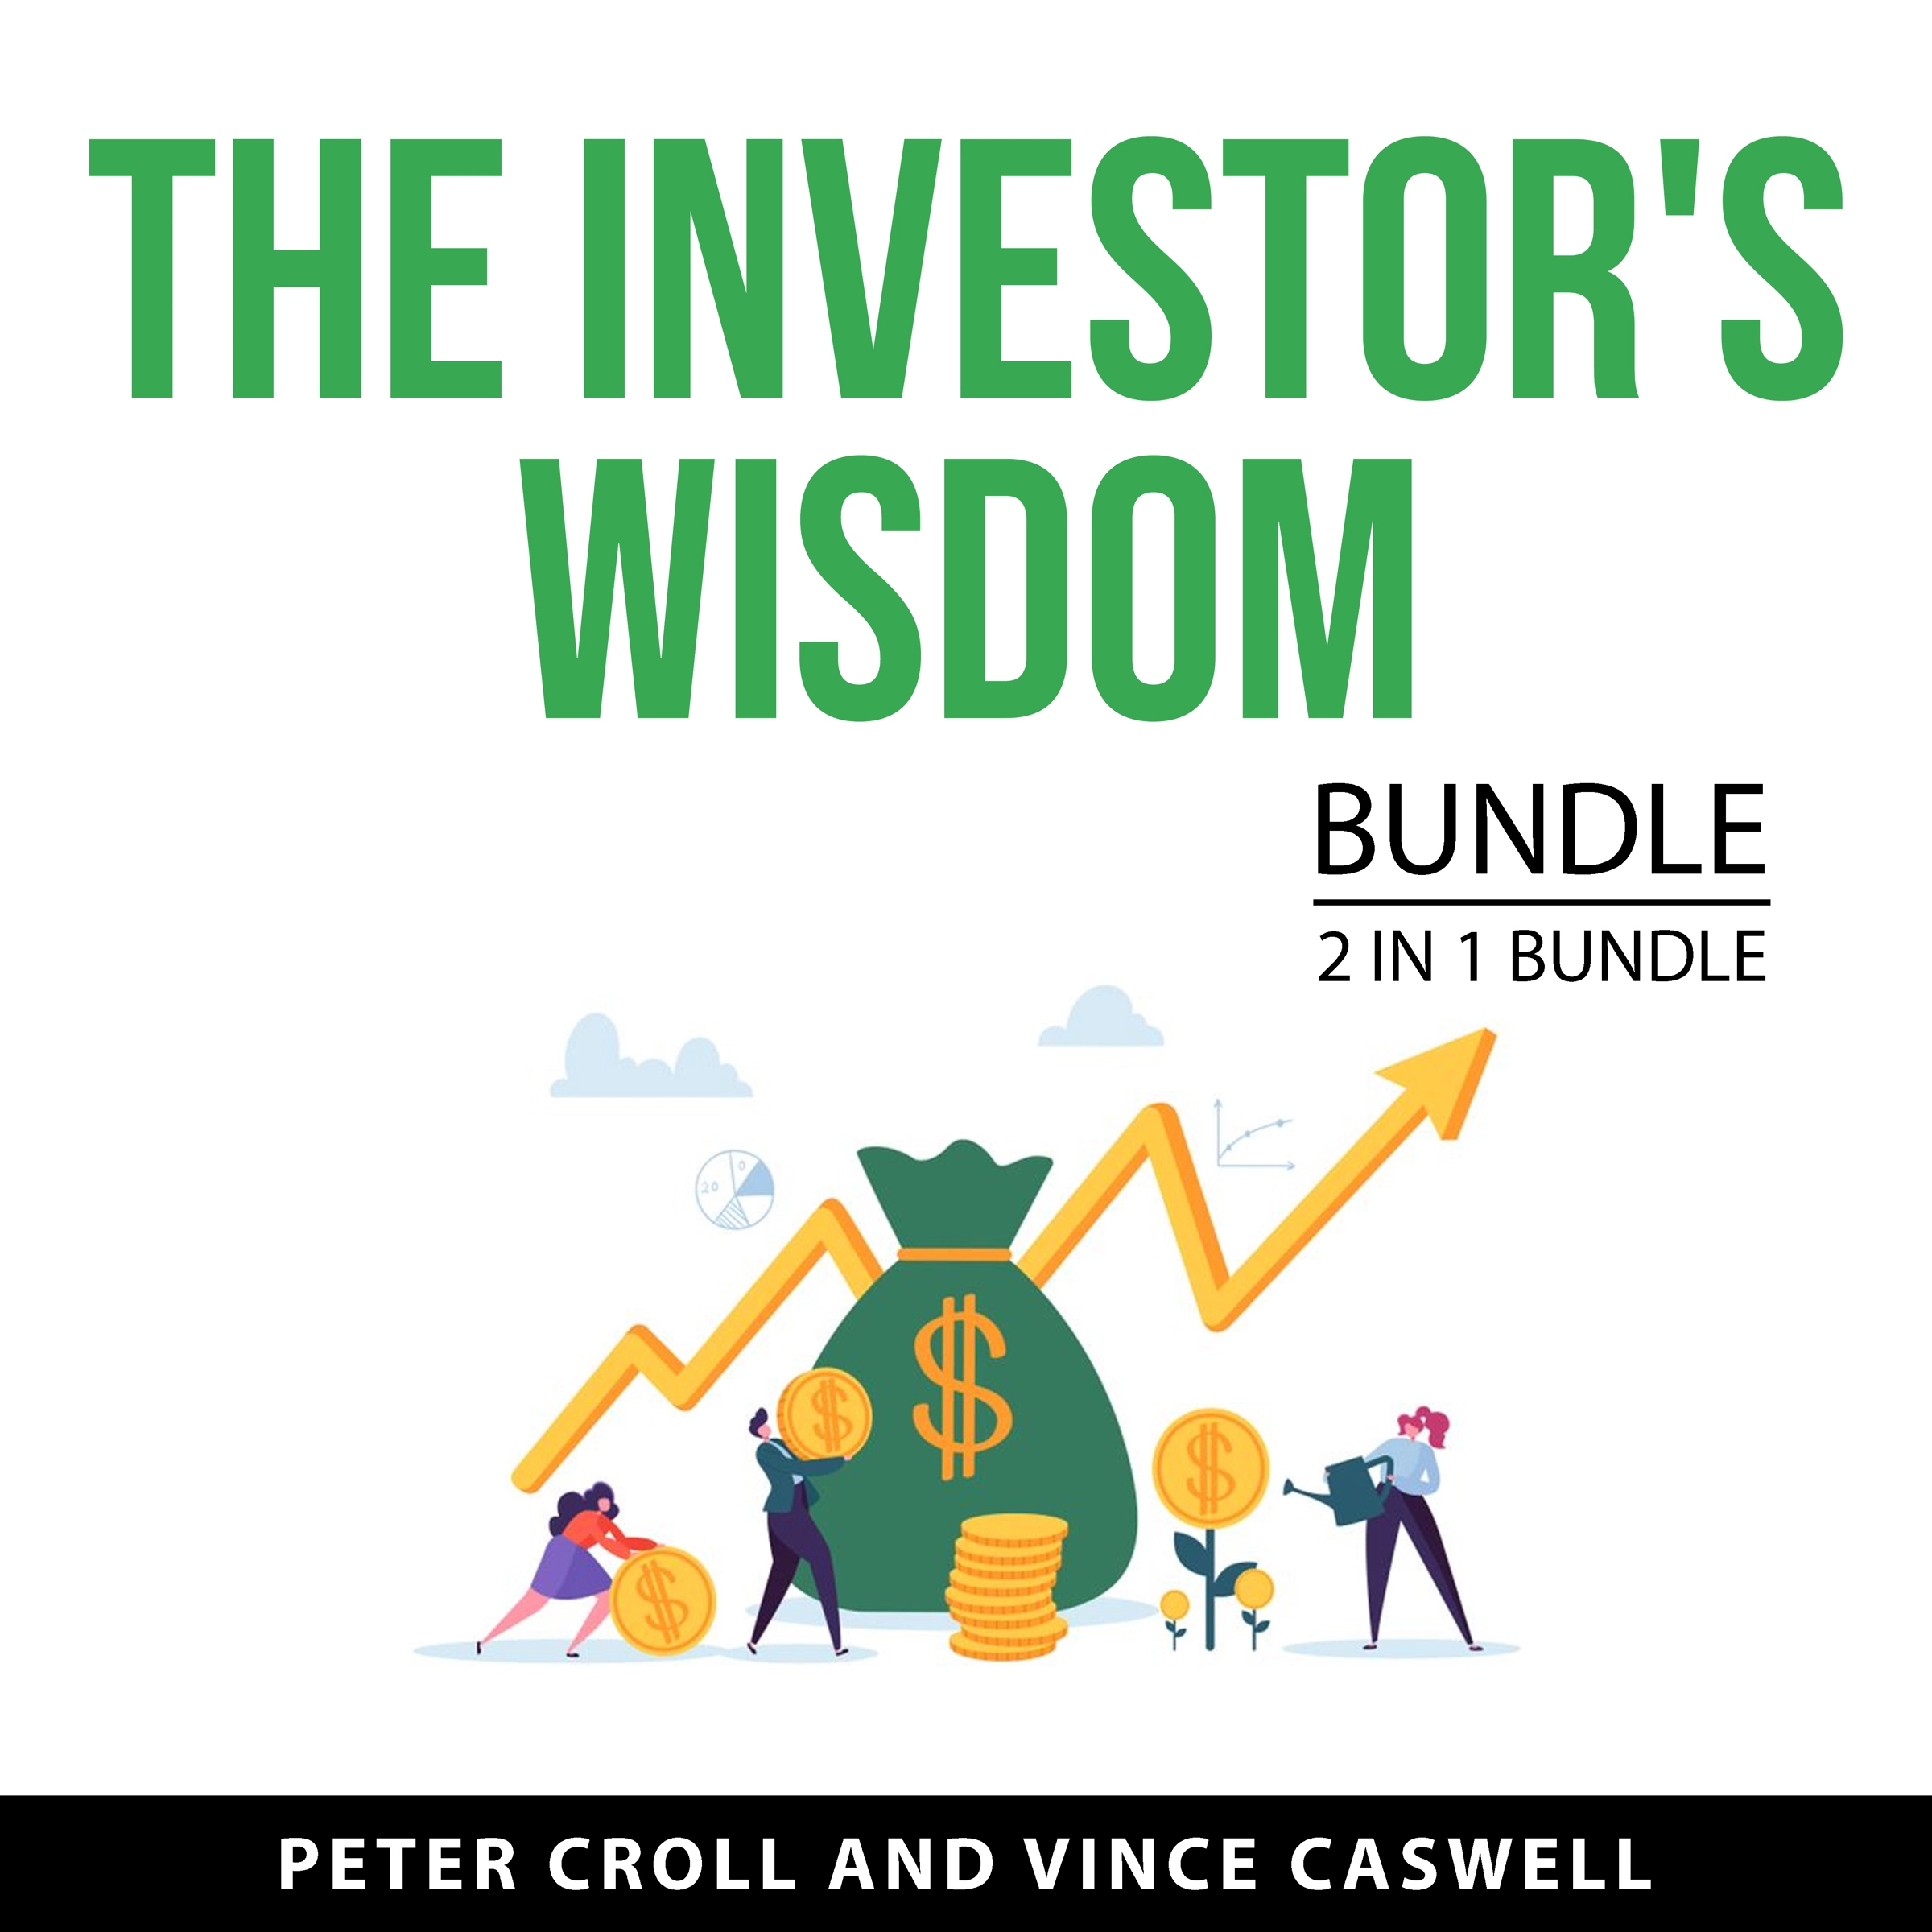 The Investor's Wisdom Bundle, 2 in 1 Bundle Audiobook by Vince Caswell